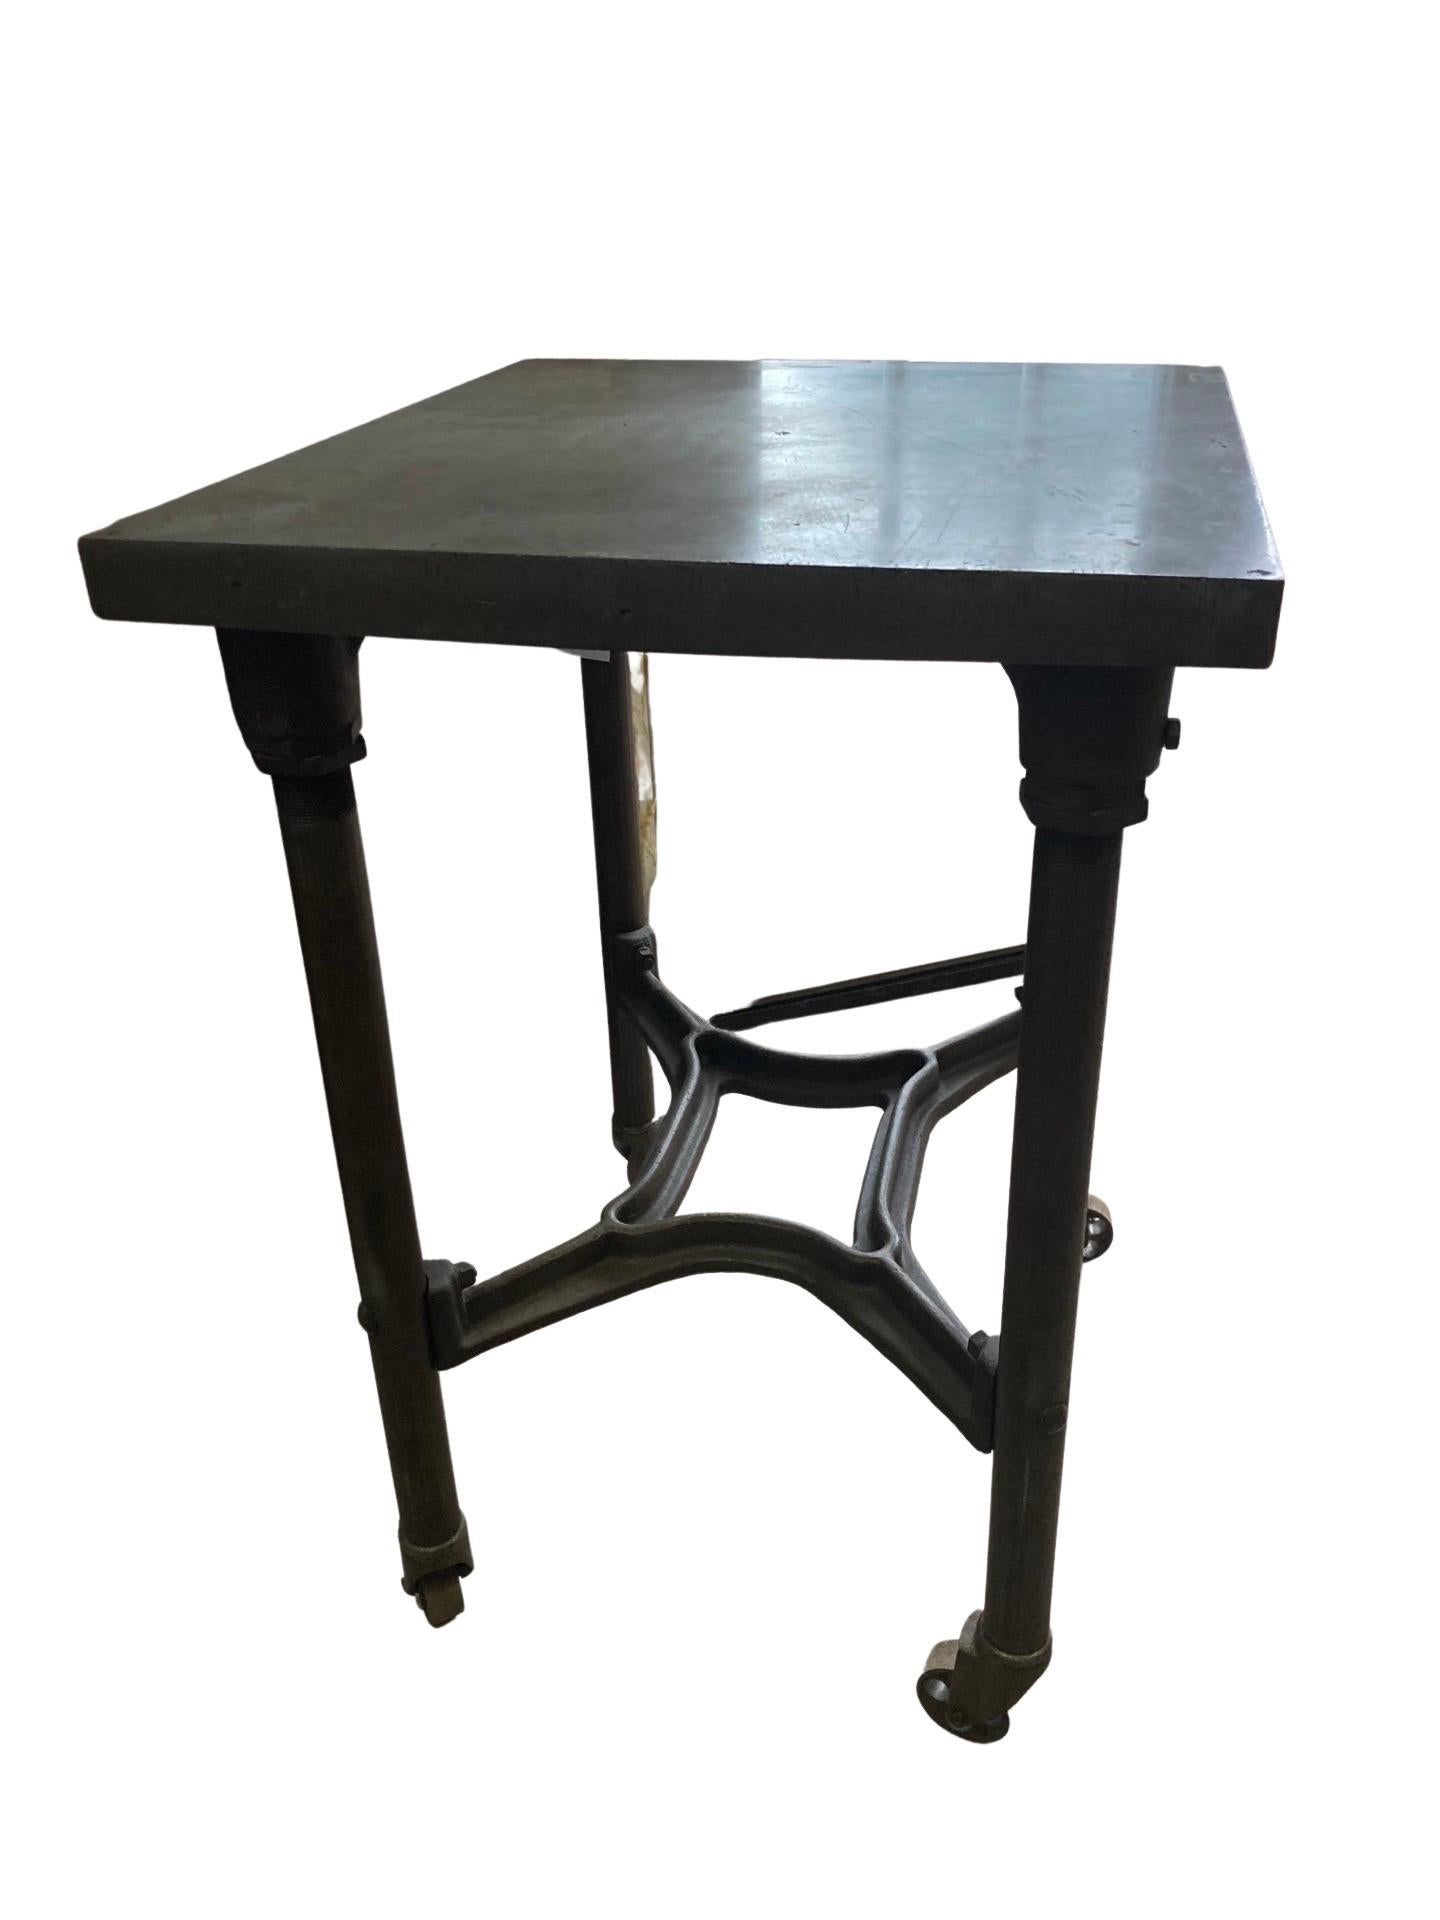 Turtle table built in the early 1900s and originally used in a printing shop in Kansas. This is a beautiful example of American industrial tables, and was used for decades to help business run smoothly. Every part of the table is still original,